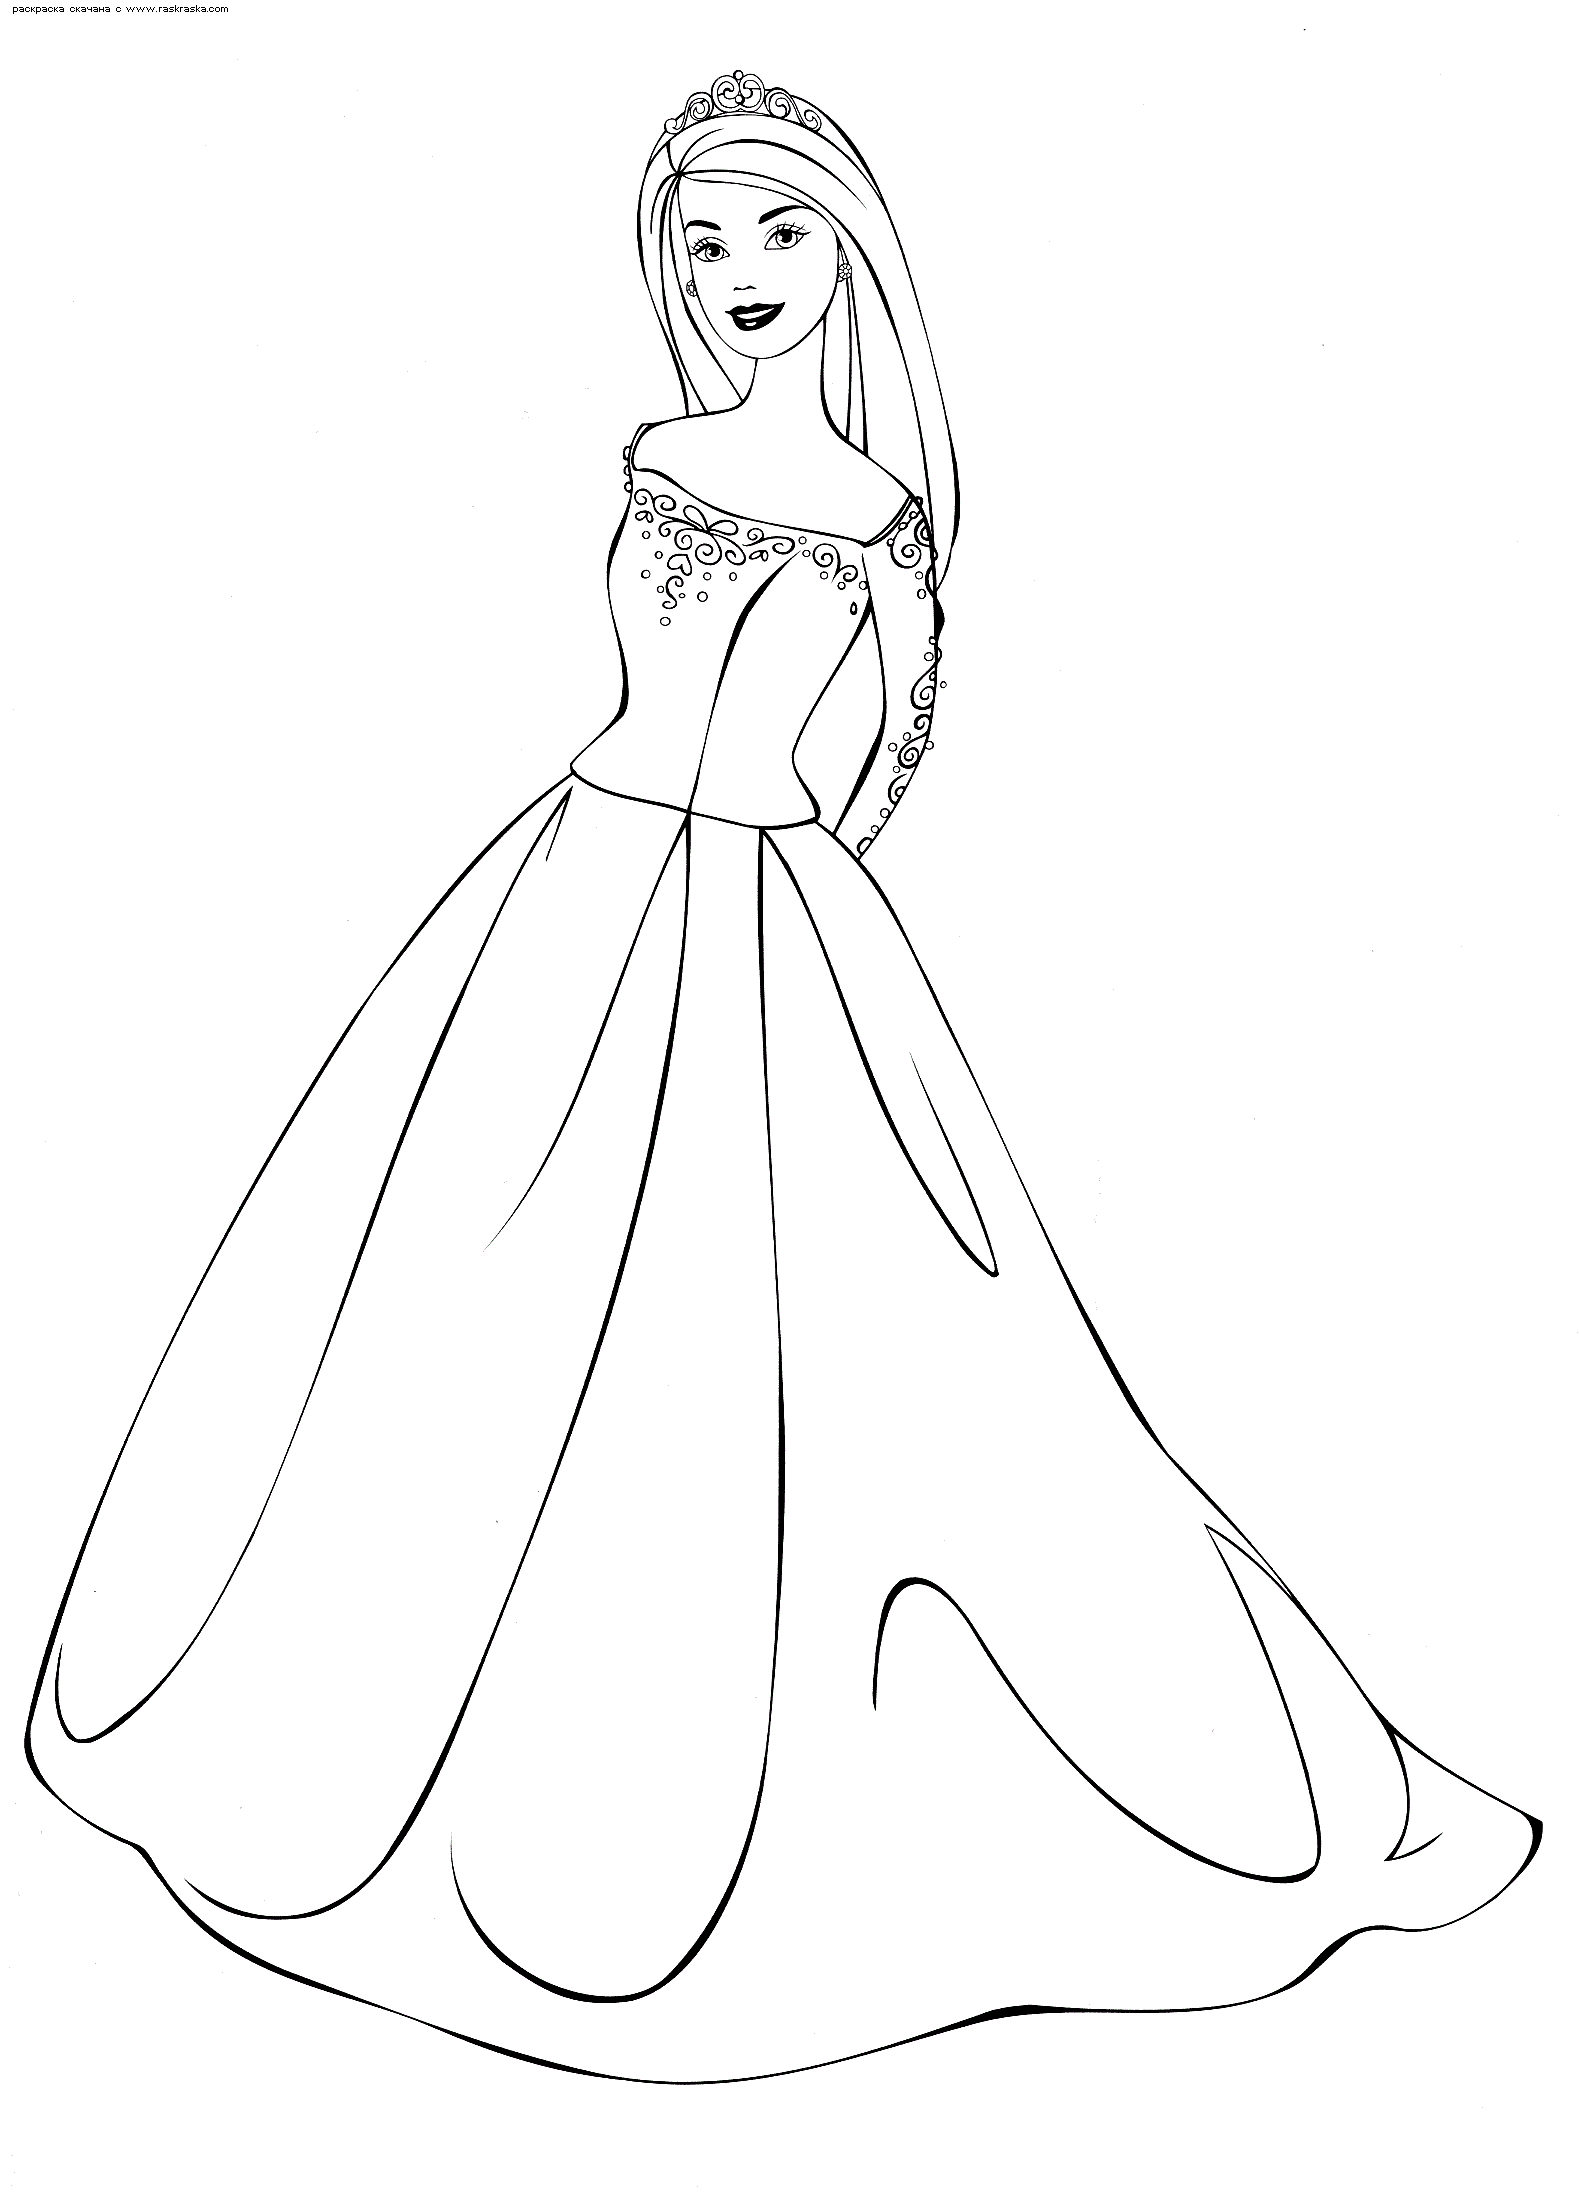 Barbie coloring pages to print for free; mermaid, princess ...